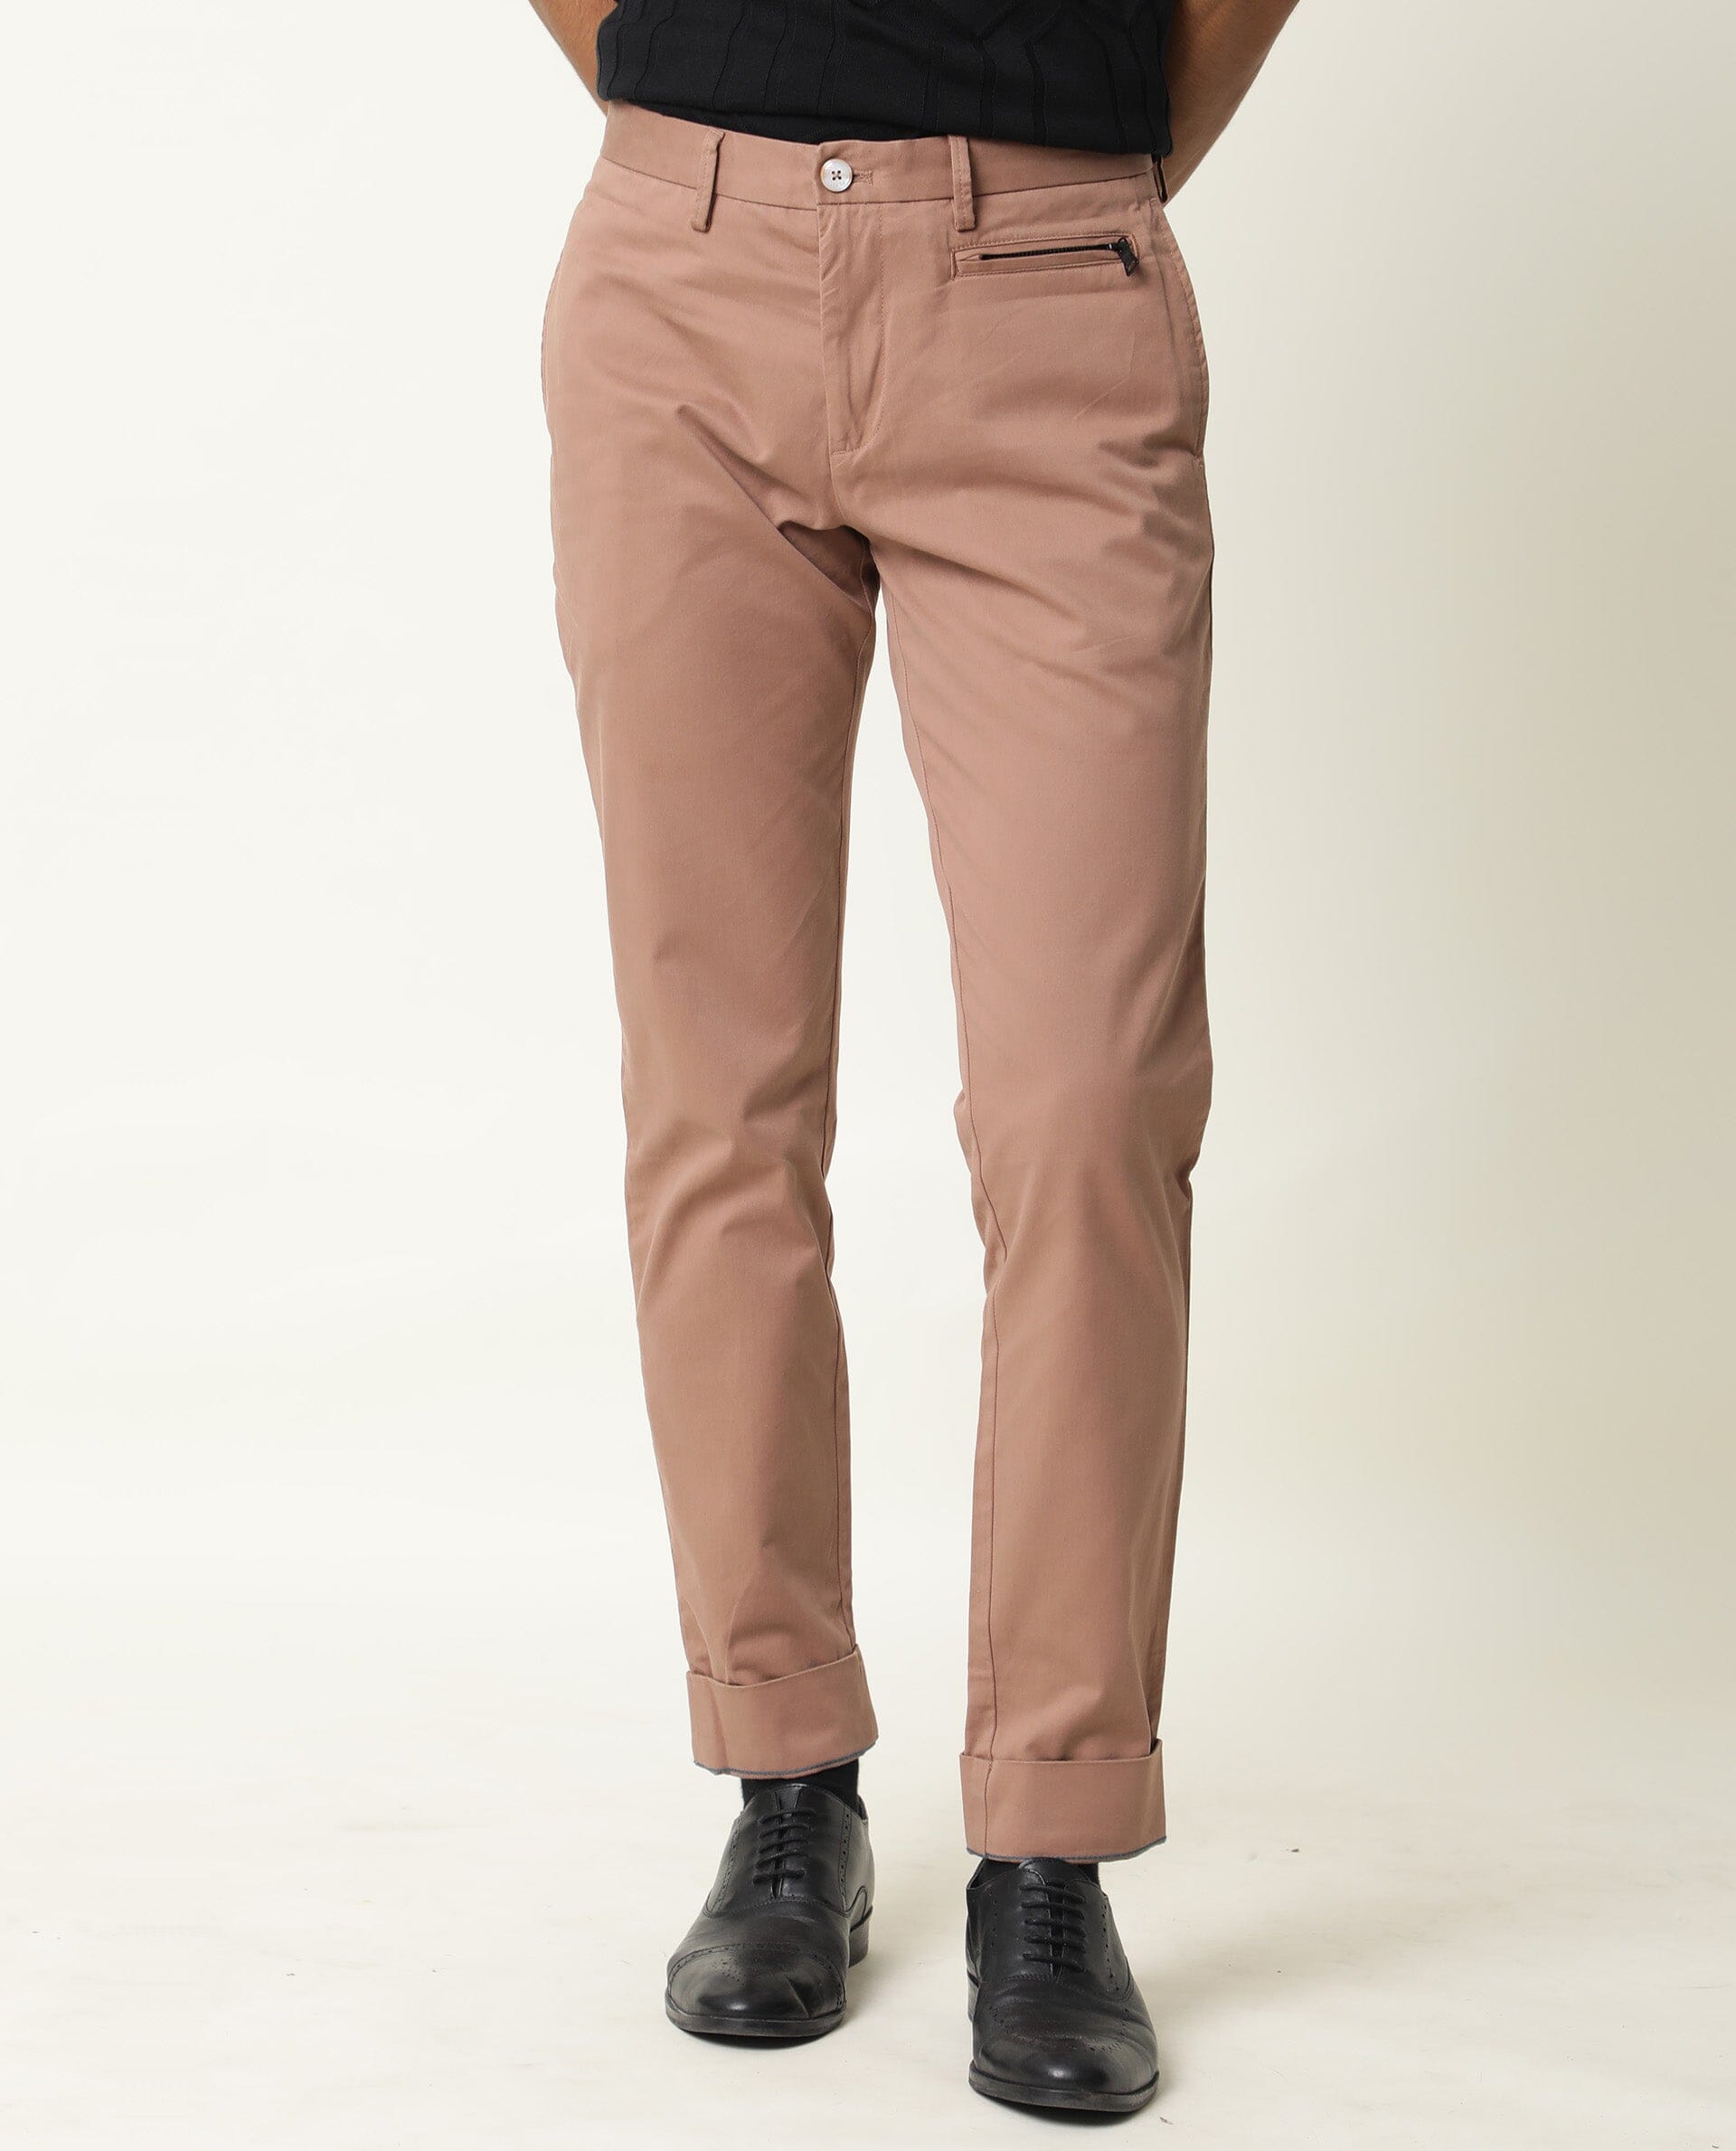 Buy men's trousers and chinos in a variety of fits and fabrics online |  MEYER-trousers